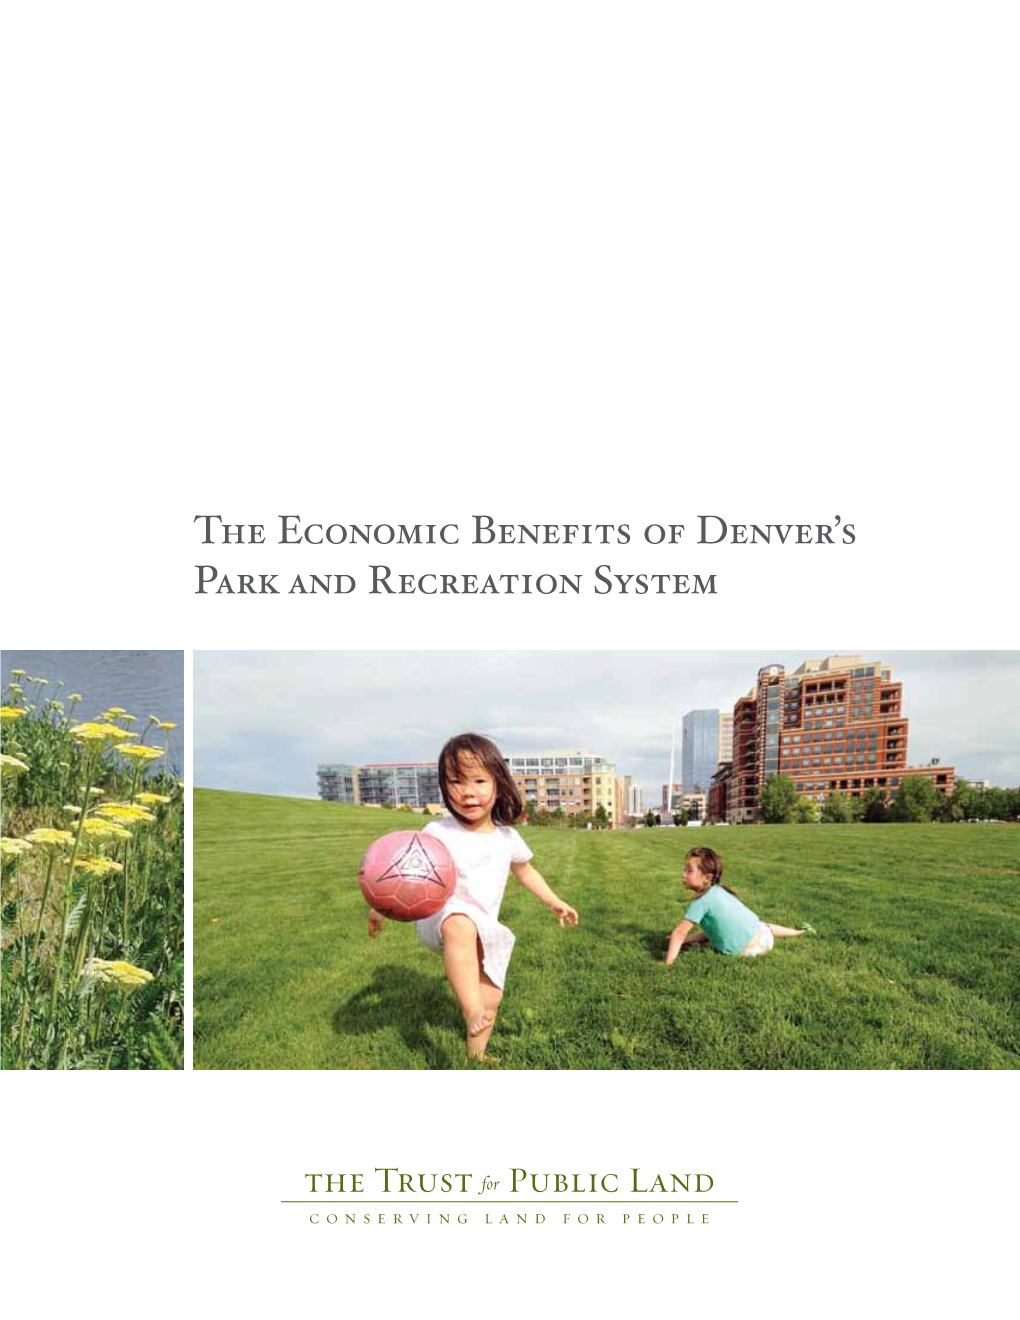 The Economic Benefits of Denver's Park and Recreation System